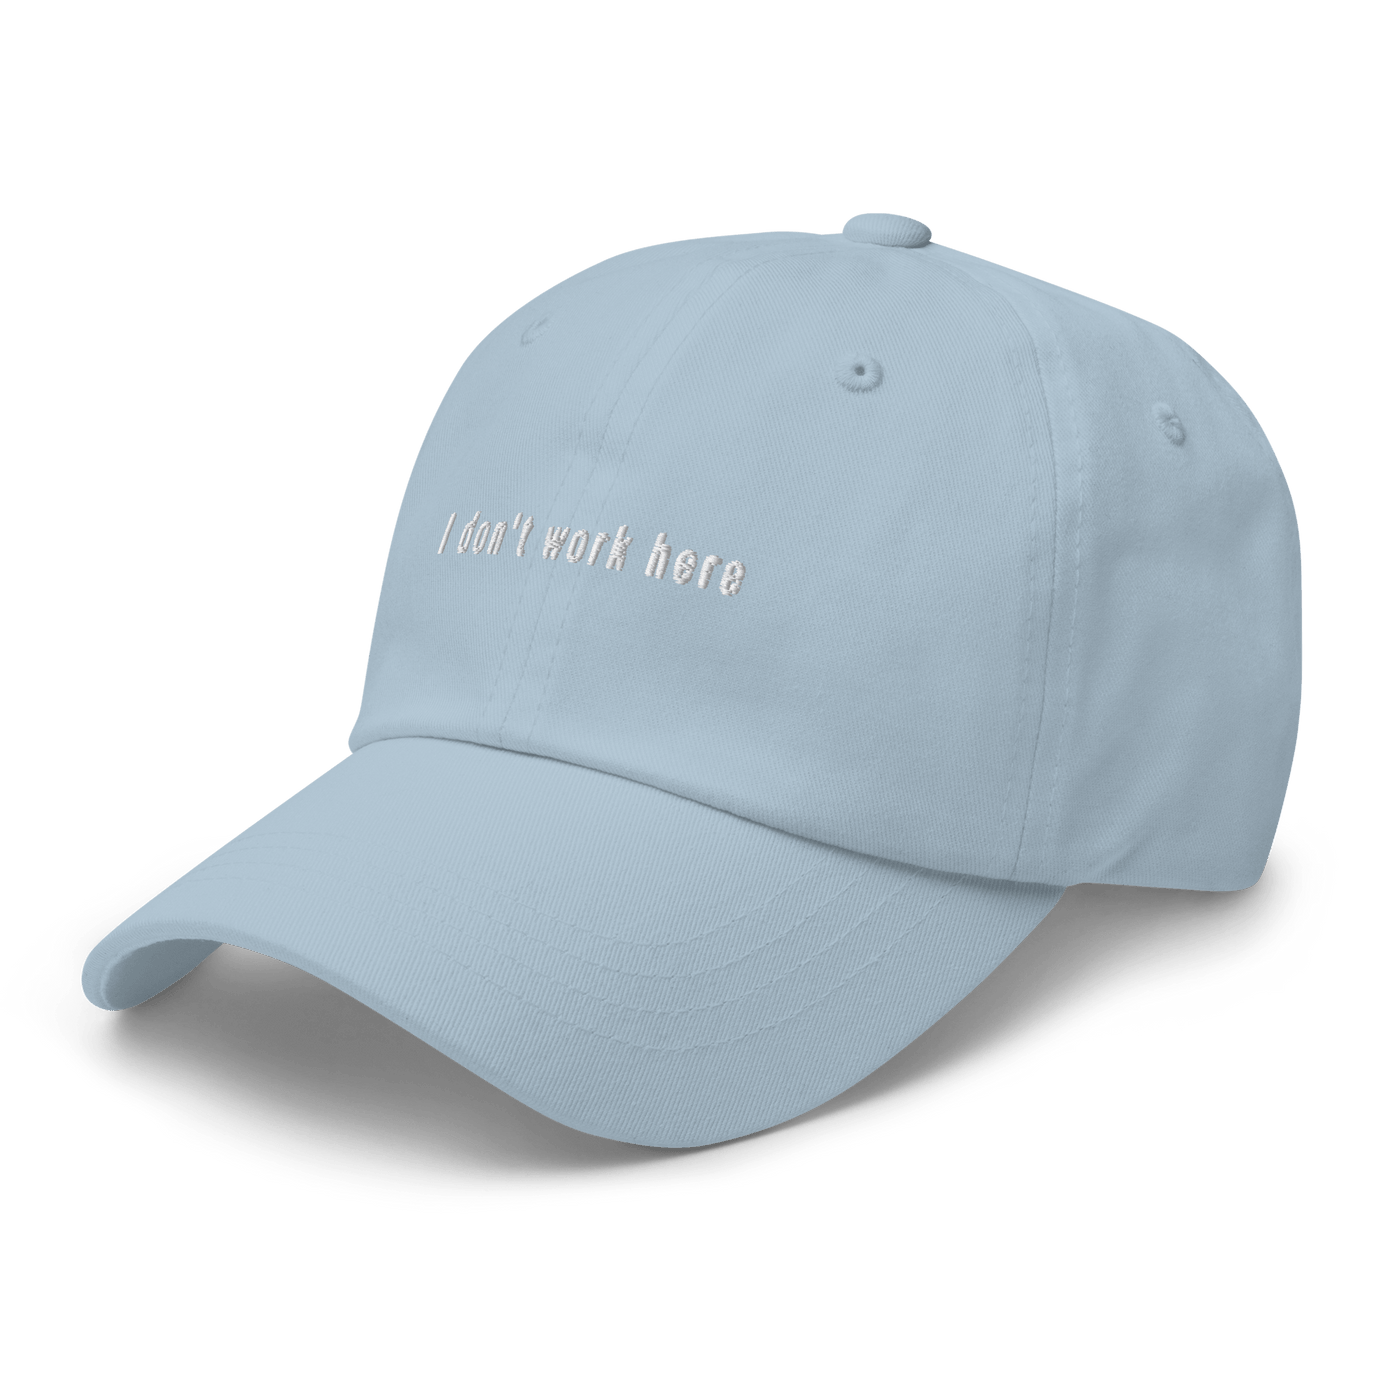 I don't work here Dad hat - Light Blue - - Just Another Cap Store